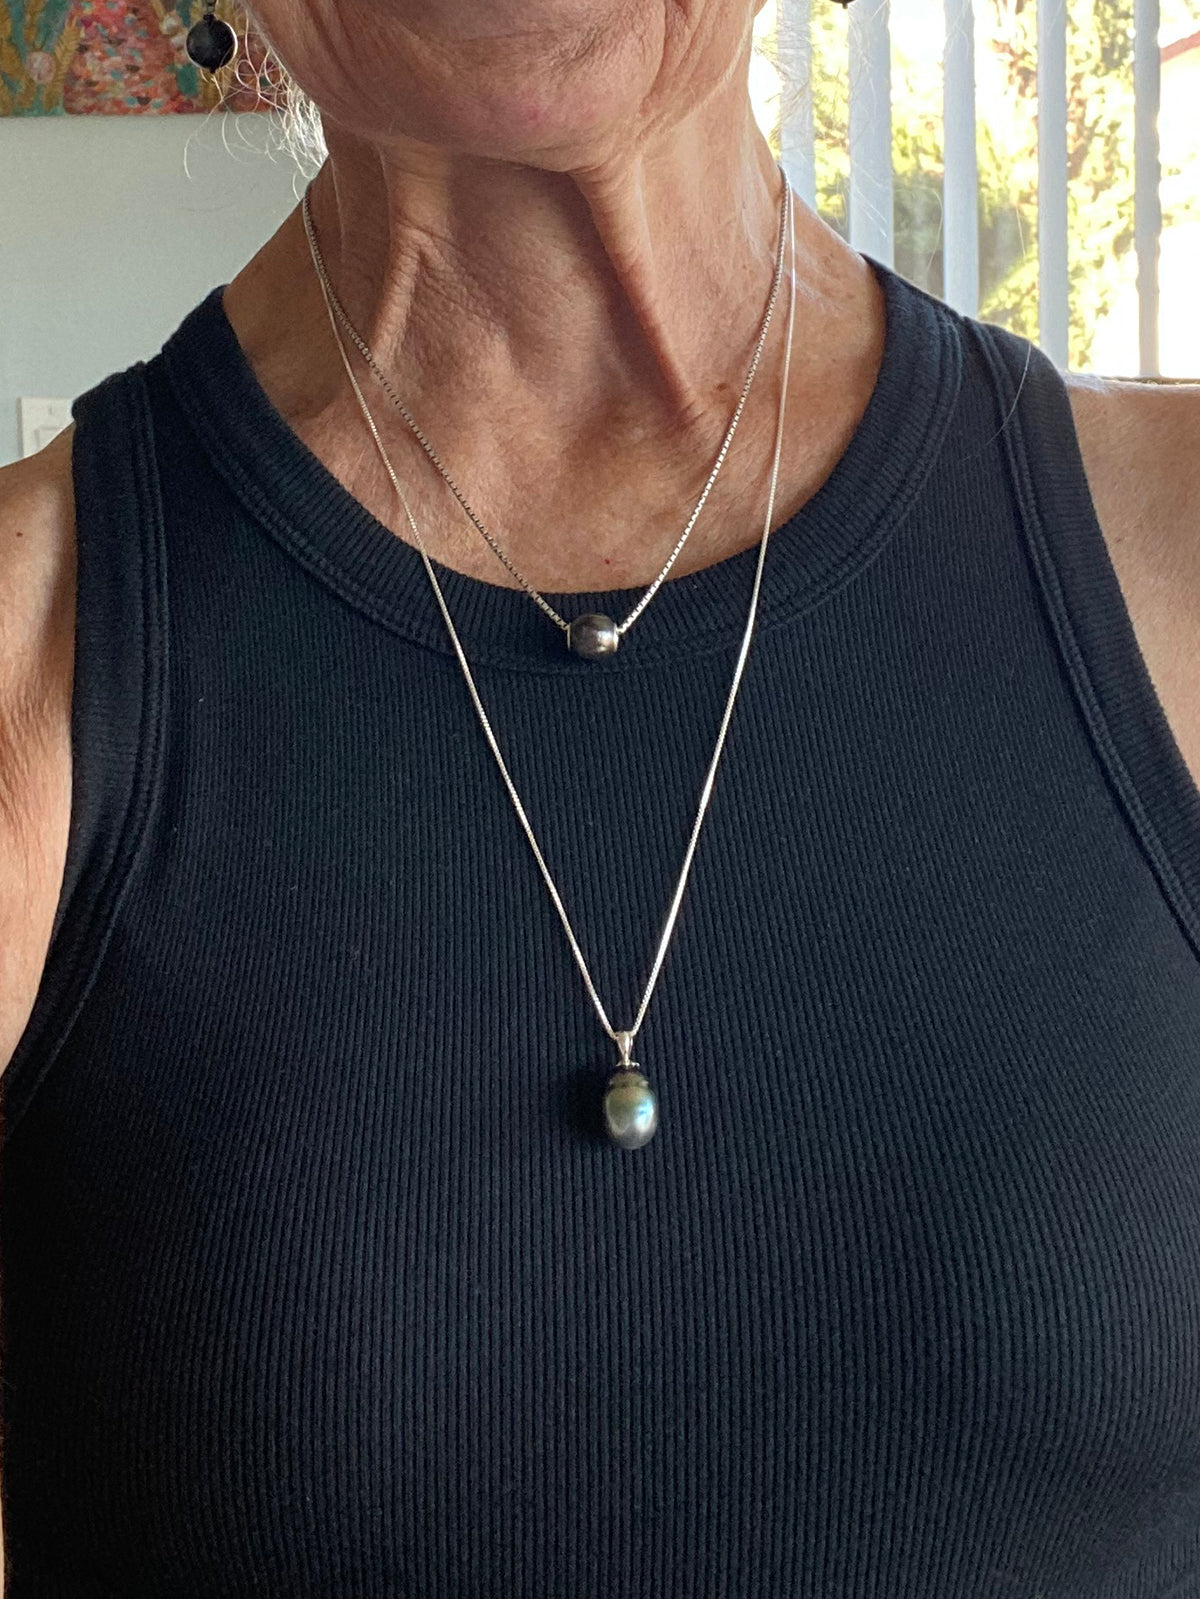 11-15mm Peacock Tahitian Pearl Pendant on 14k White Gold with Sterling Chain by Linda Queally